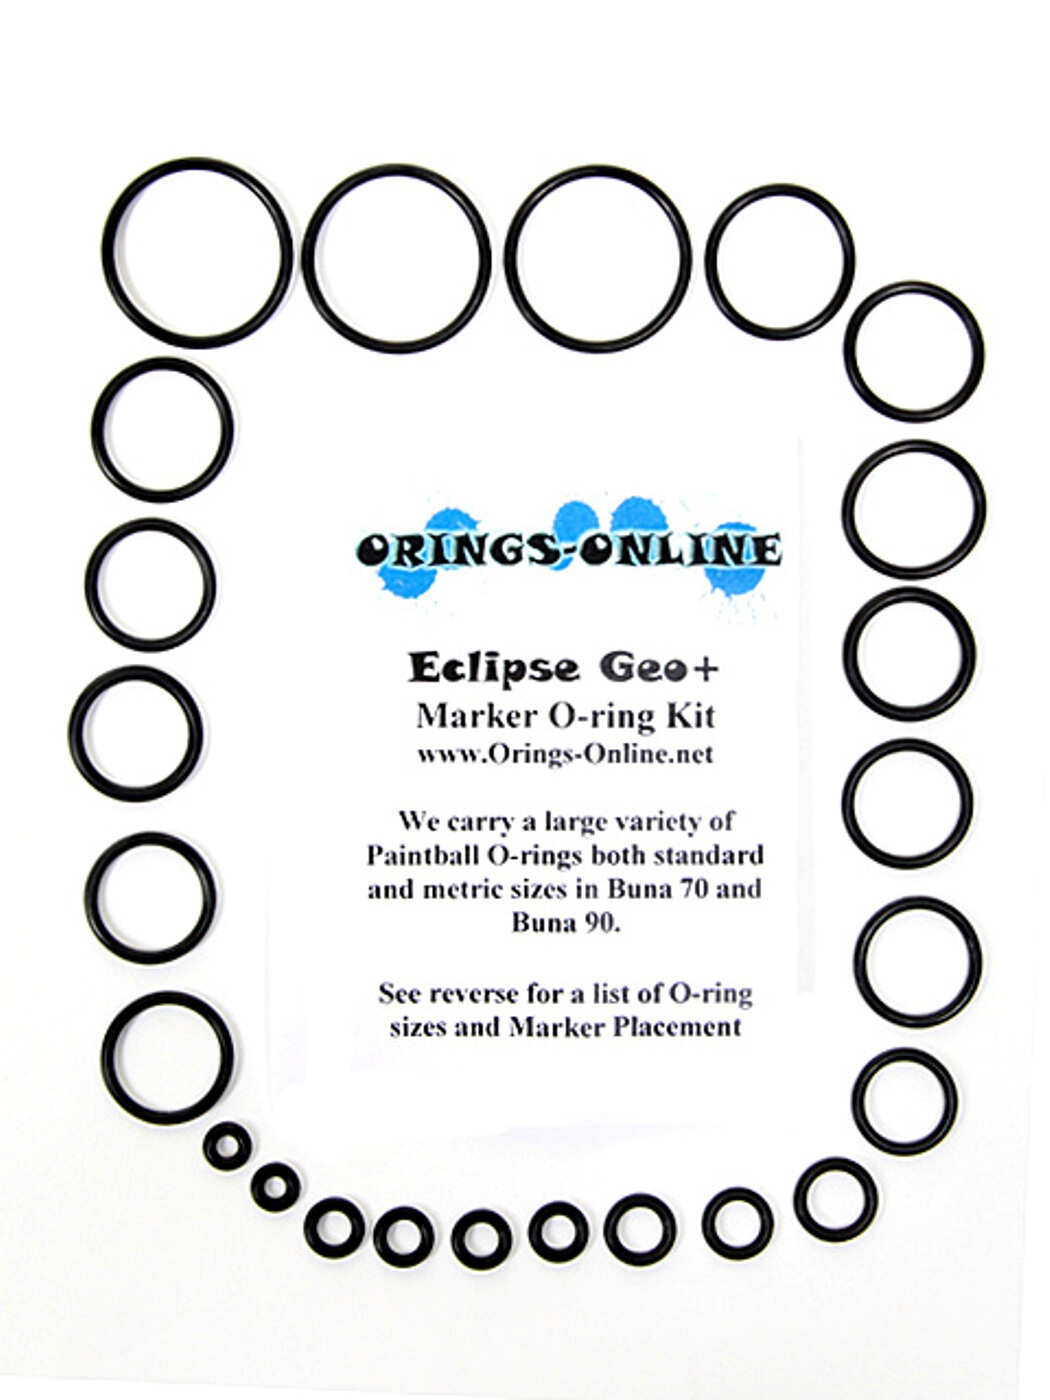 Planet Eclipse Geo Plus + Marker O-ring Kit